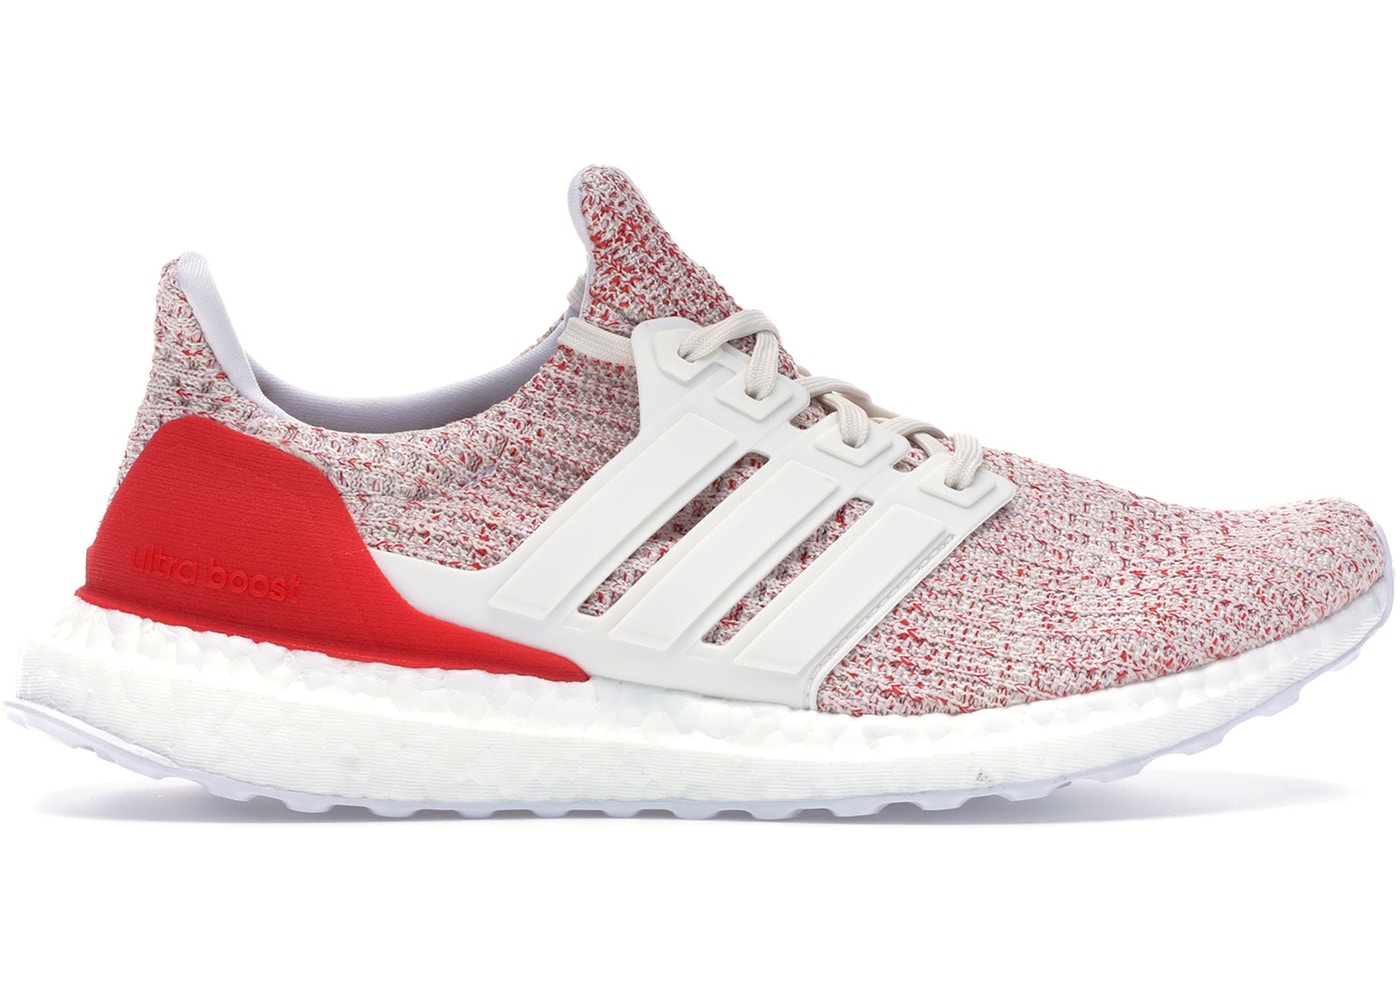 adidas ultra boost red